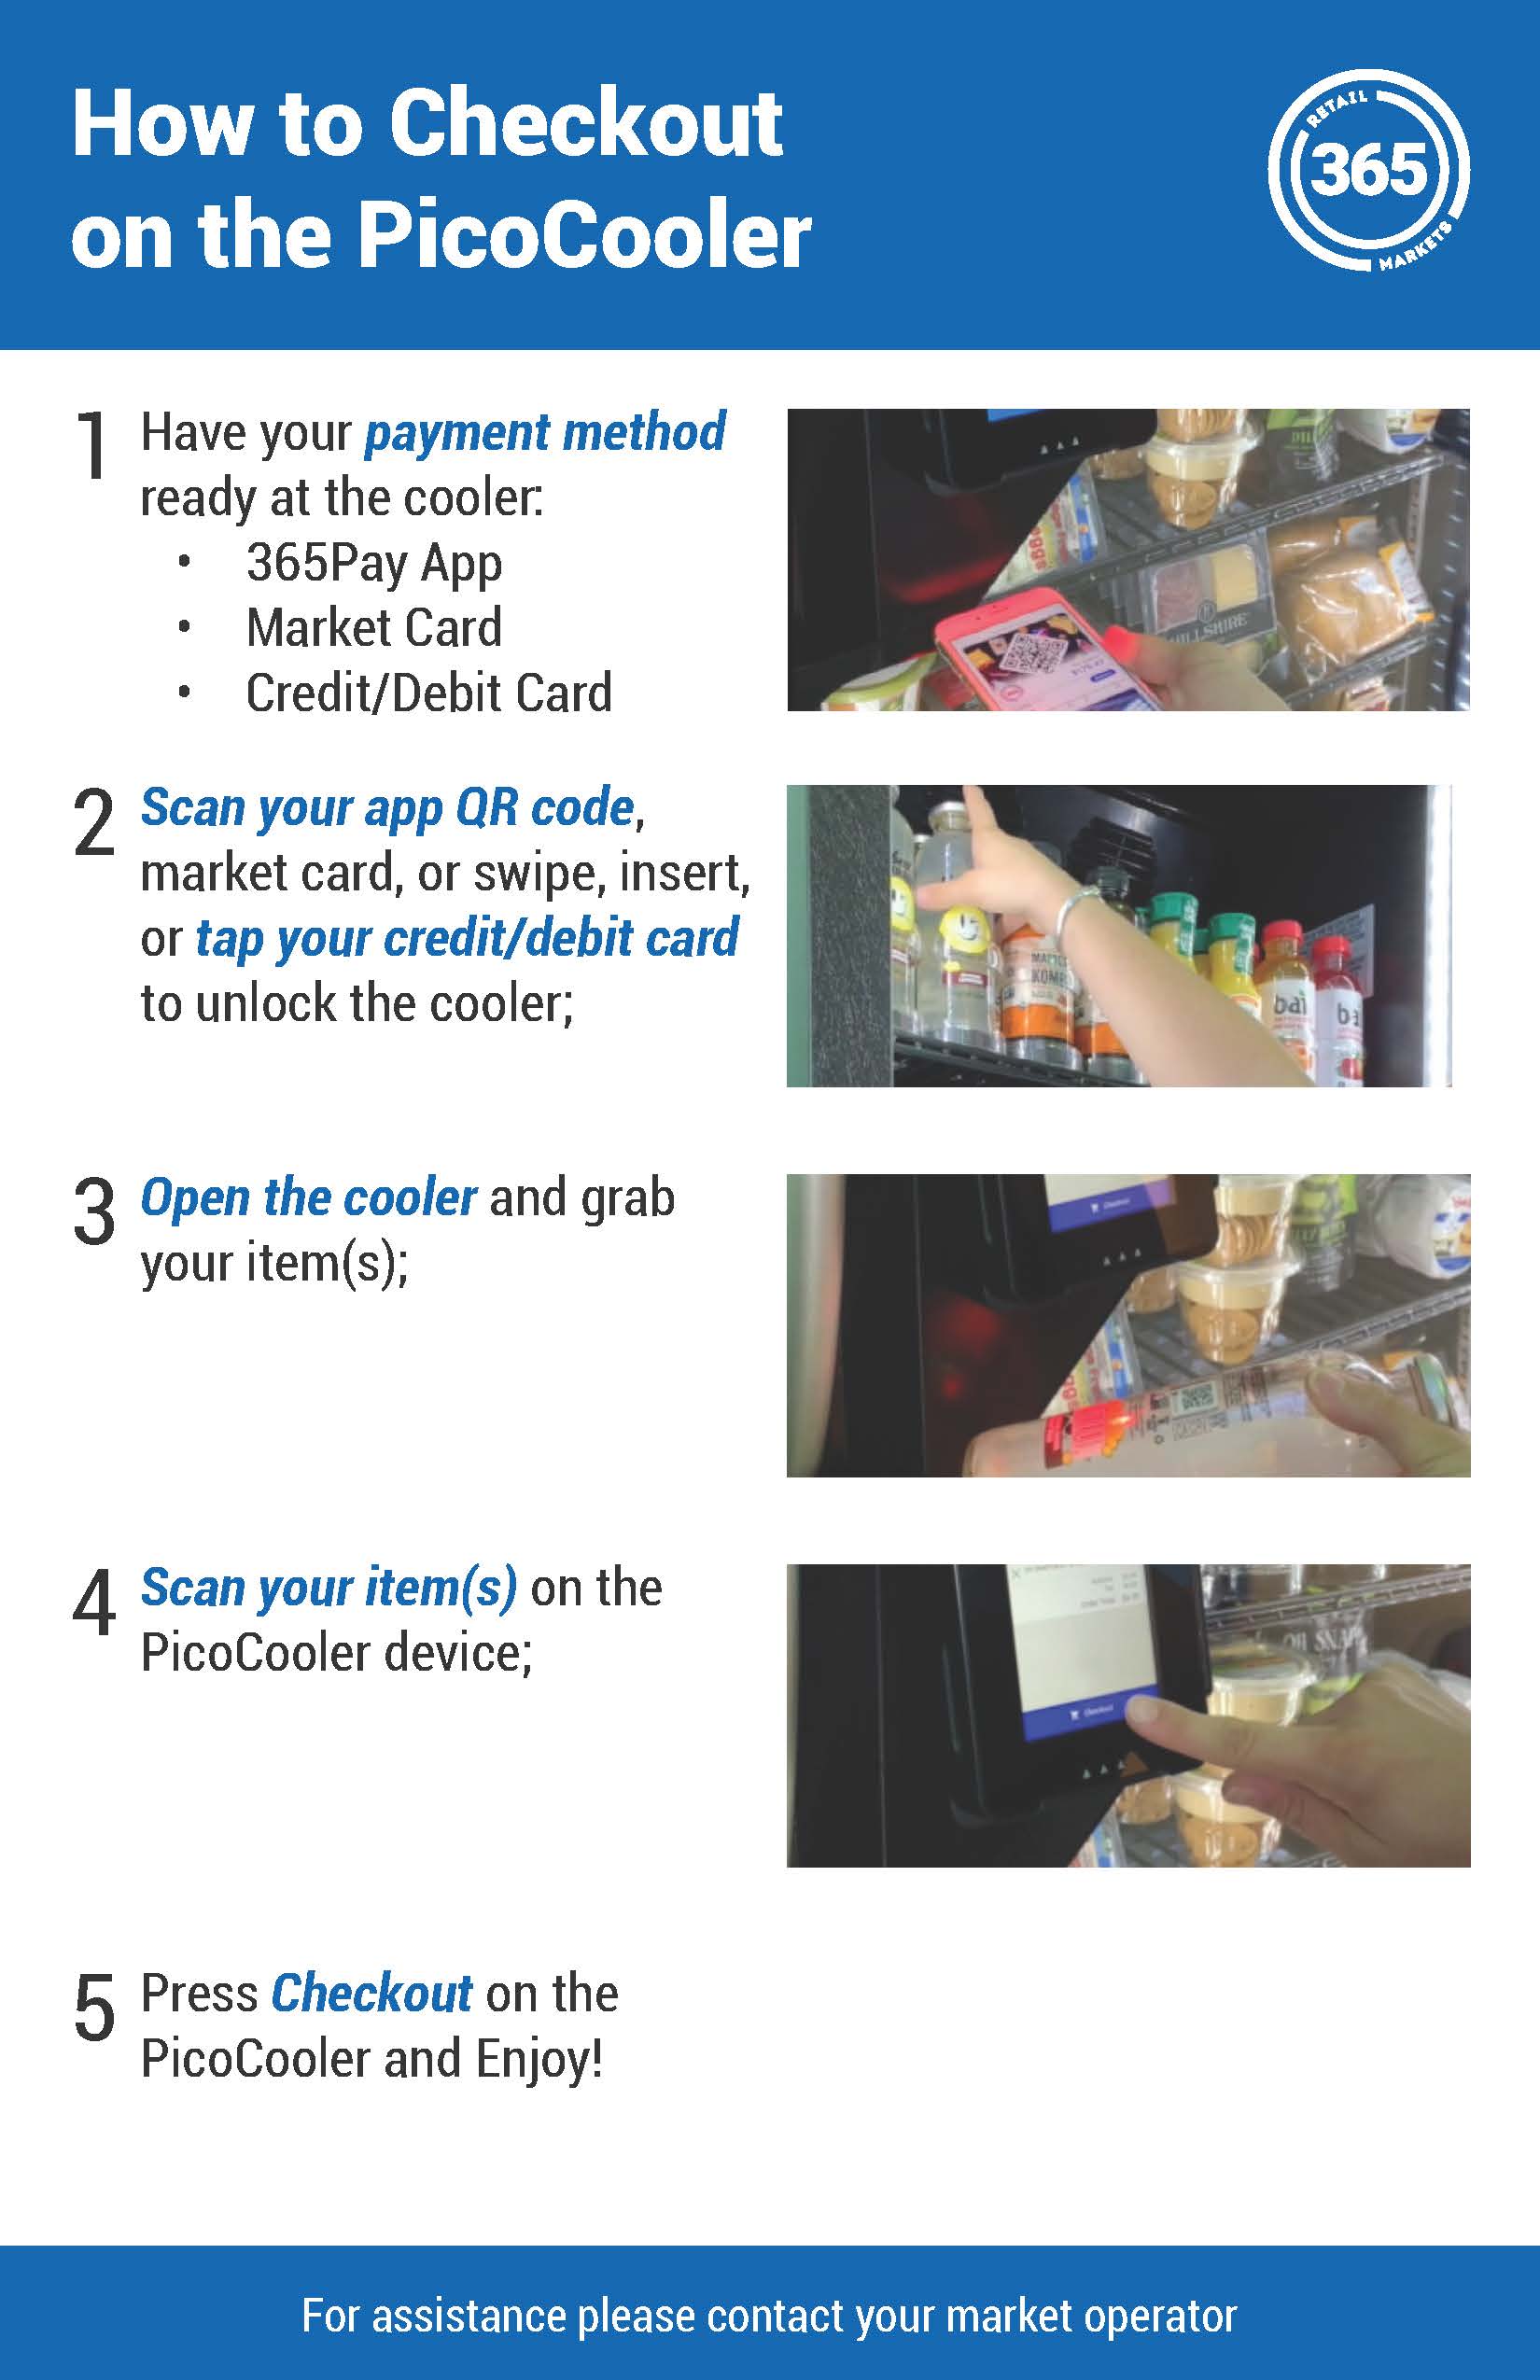 WingCards-PicoCooler-Checkout.jpg